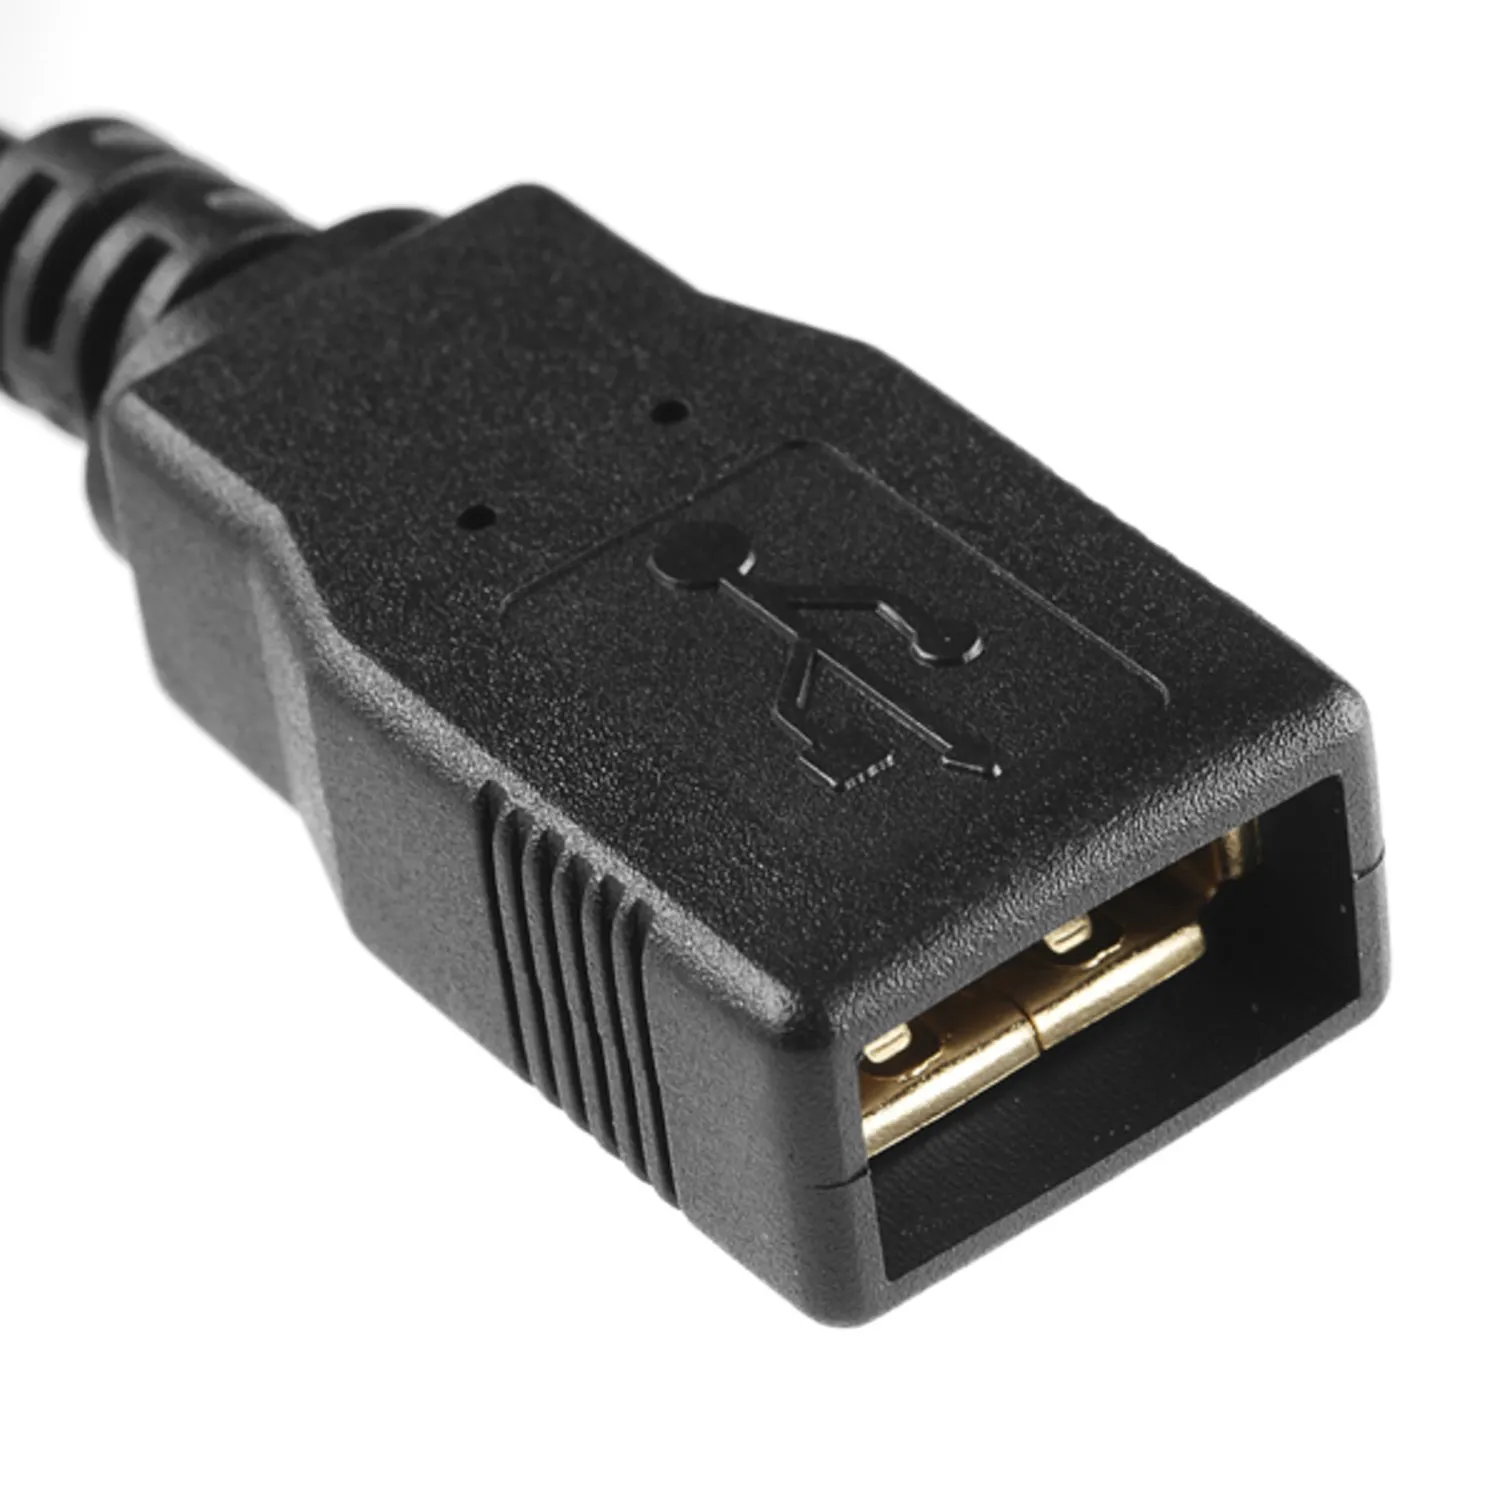 Photo of USB Cable Extension - 6 Foot